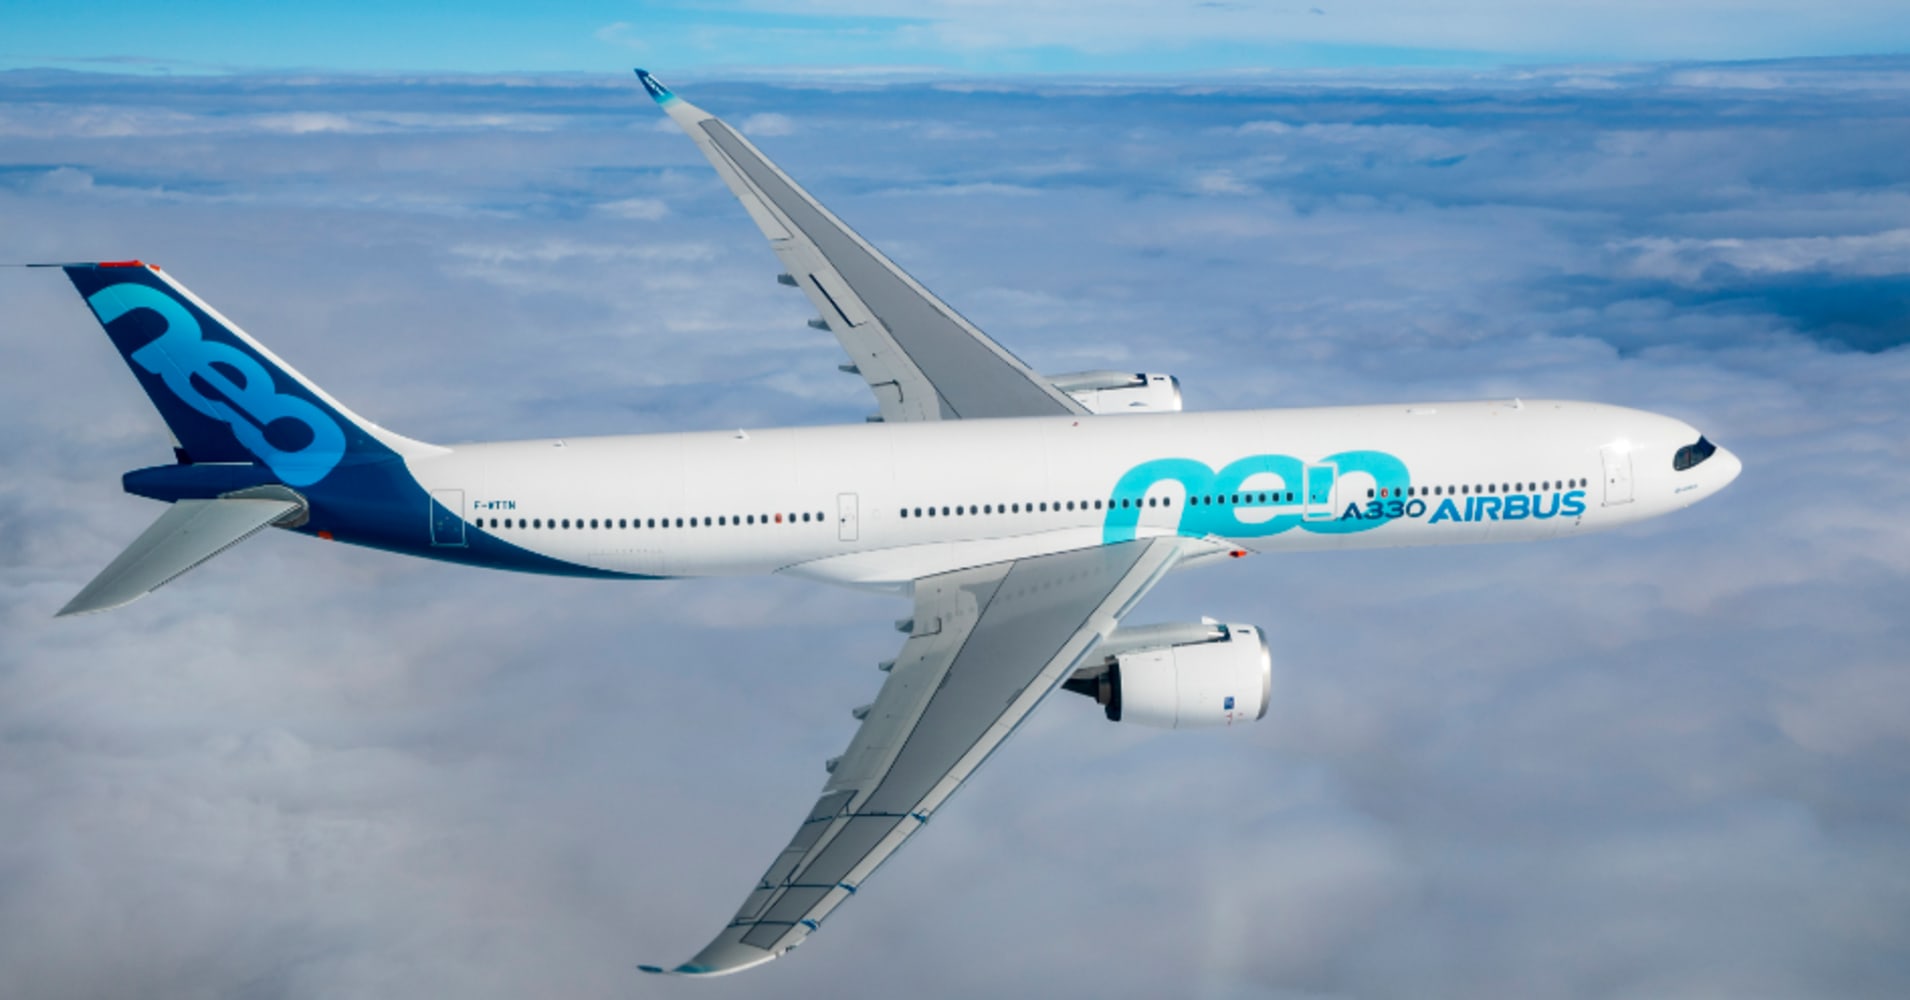 Airbus takes jab at Boeing with maiden flight of new plane